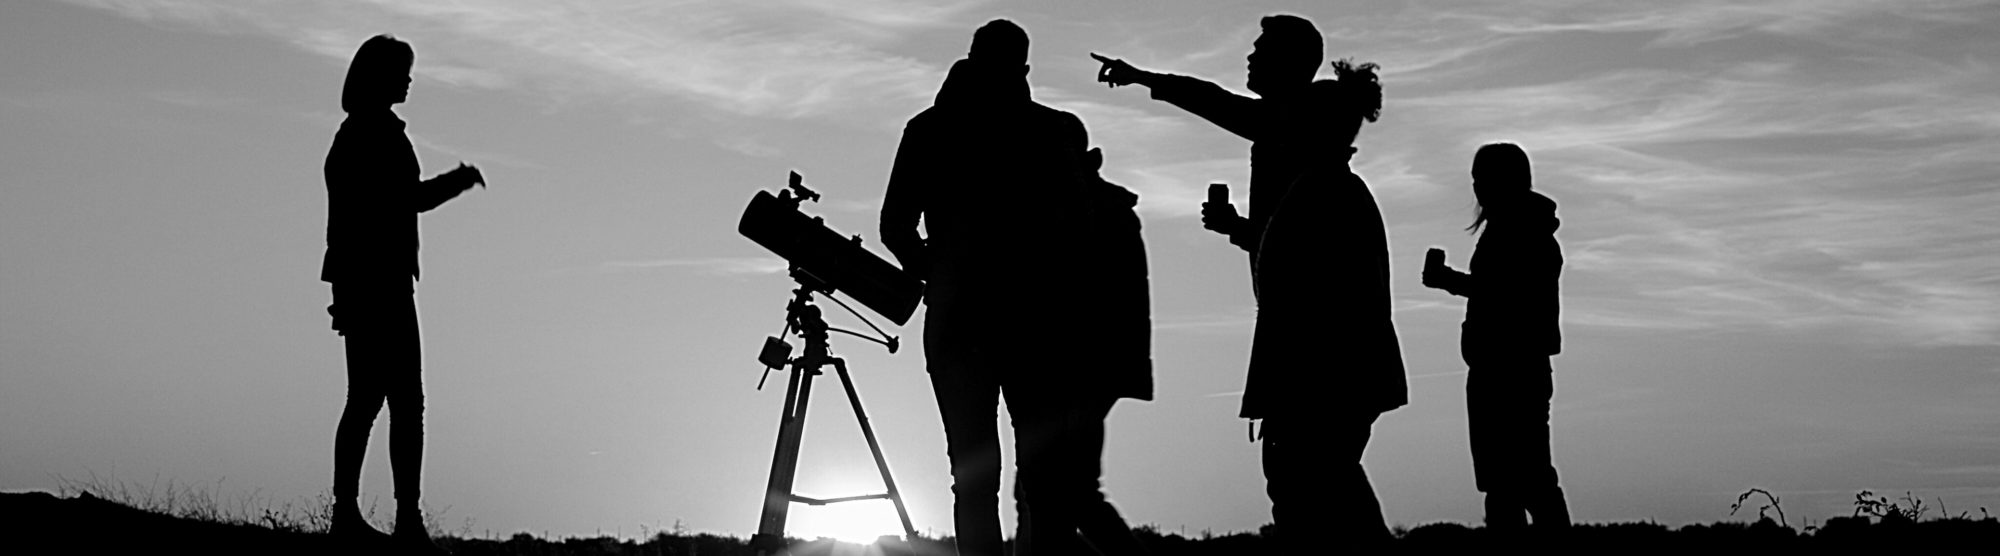 image shows a group of people gathered together with a medium-sized telescope at sunset, used as a metaphor for network discovery